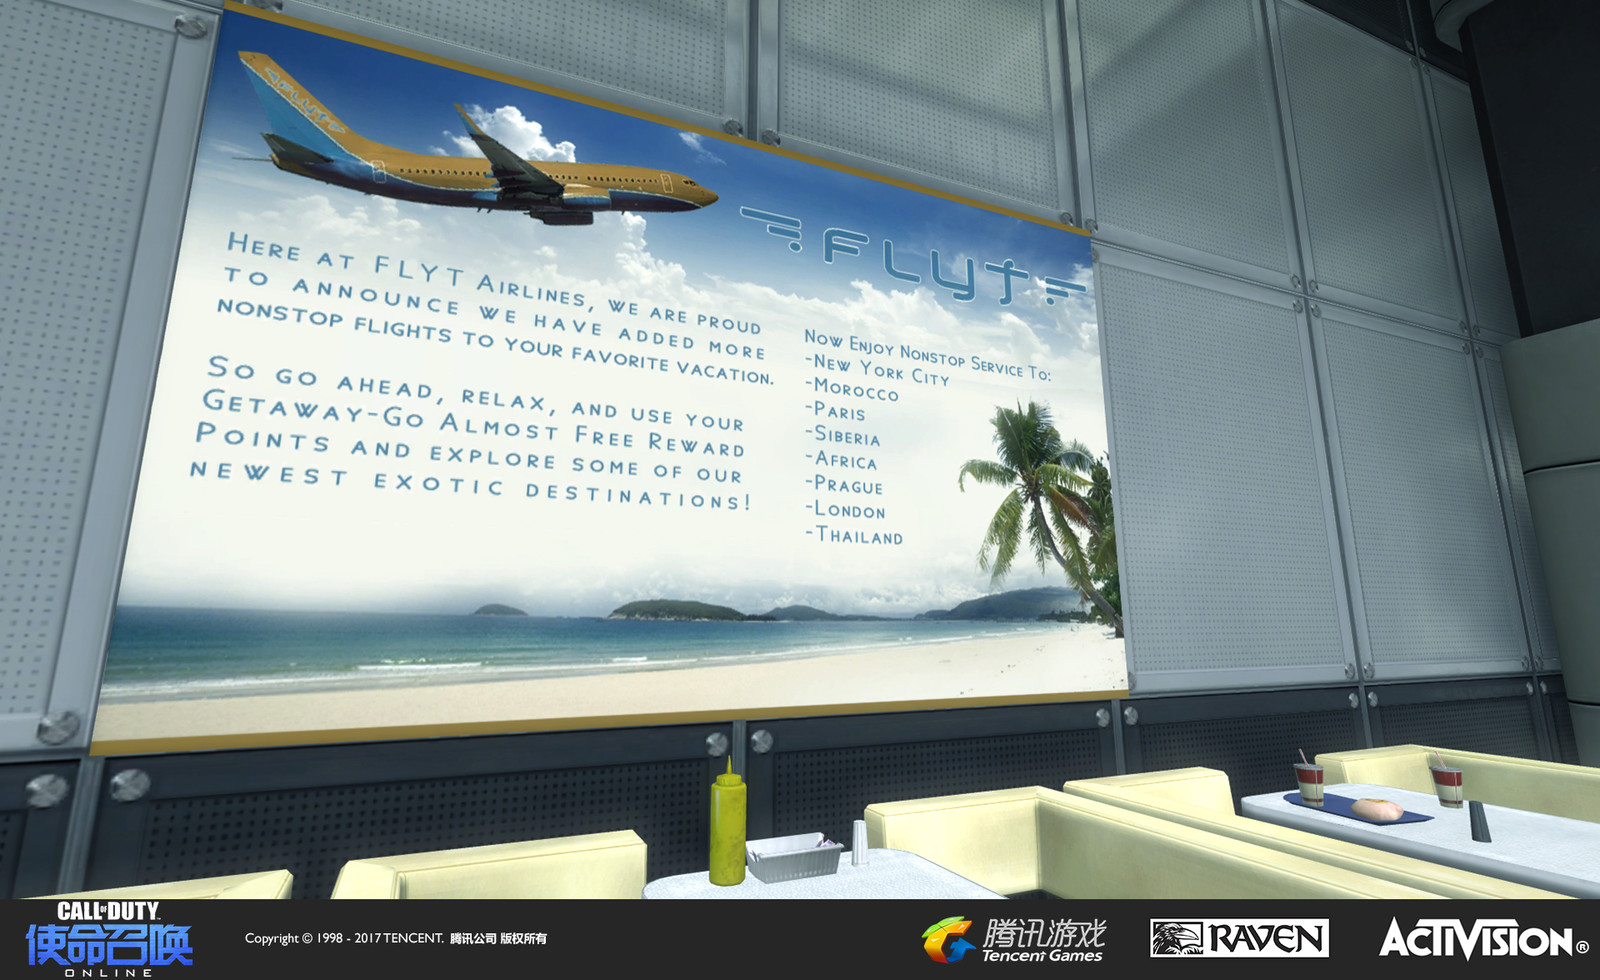 Terminal: A re-creation of the muliplayer map in Modern Warfare 2. I re-themed the ads with a new fictional airline with logo and design work.